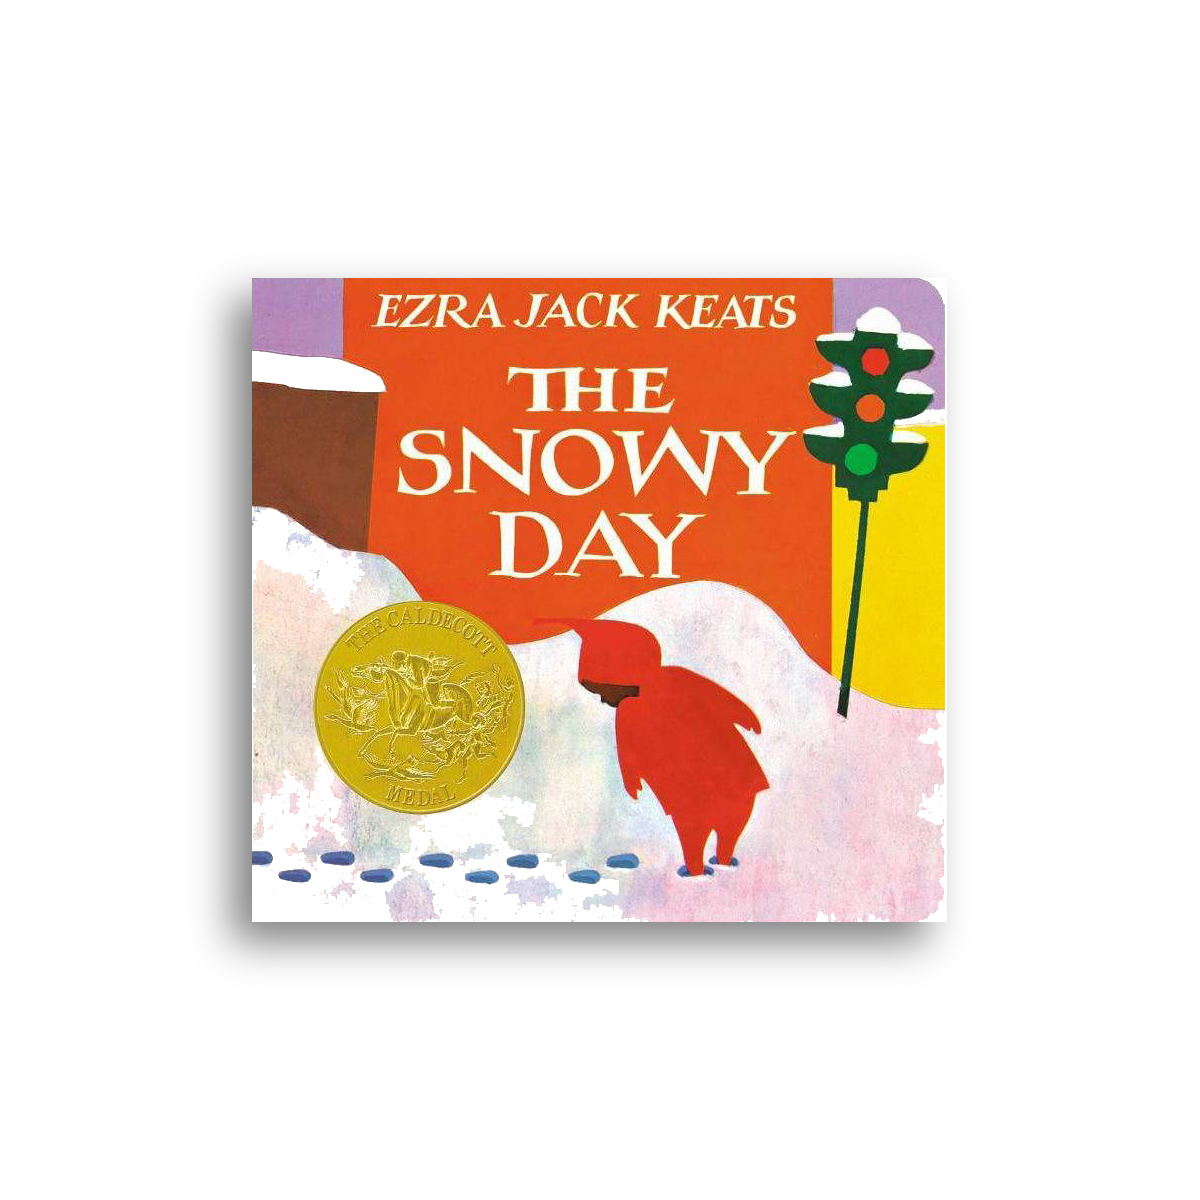 Front book cover of The Snowy Day by Ezra Jack Keats, a Caldecott Medal-winning picture book. Young boy in a red snowsuit outside in the snow by a stop light in the city.